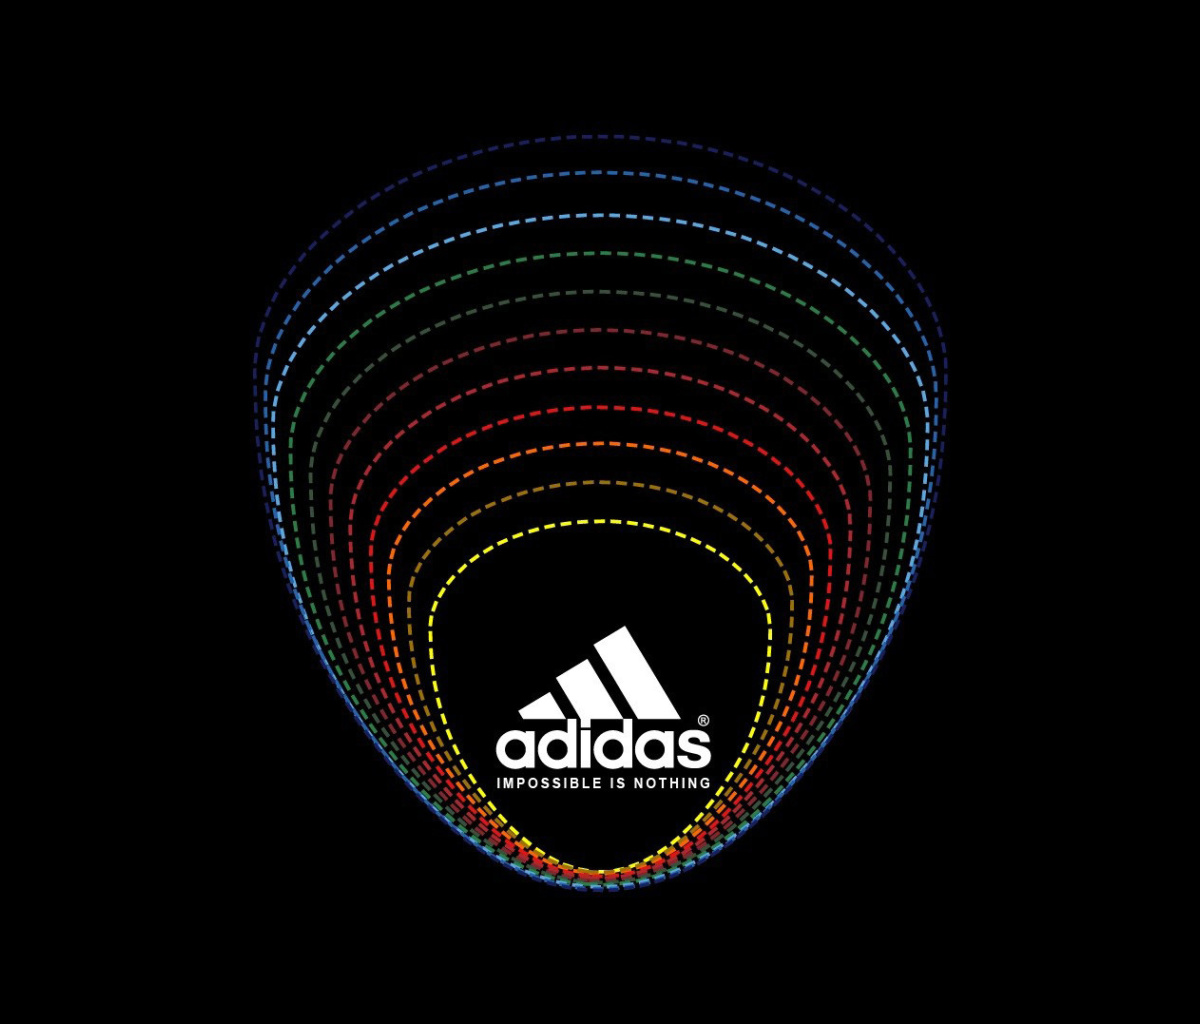 Обои Adidas Tagline, Impossible is Nothing 1200x1024